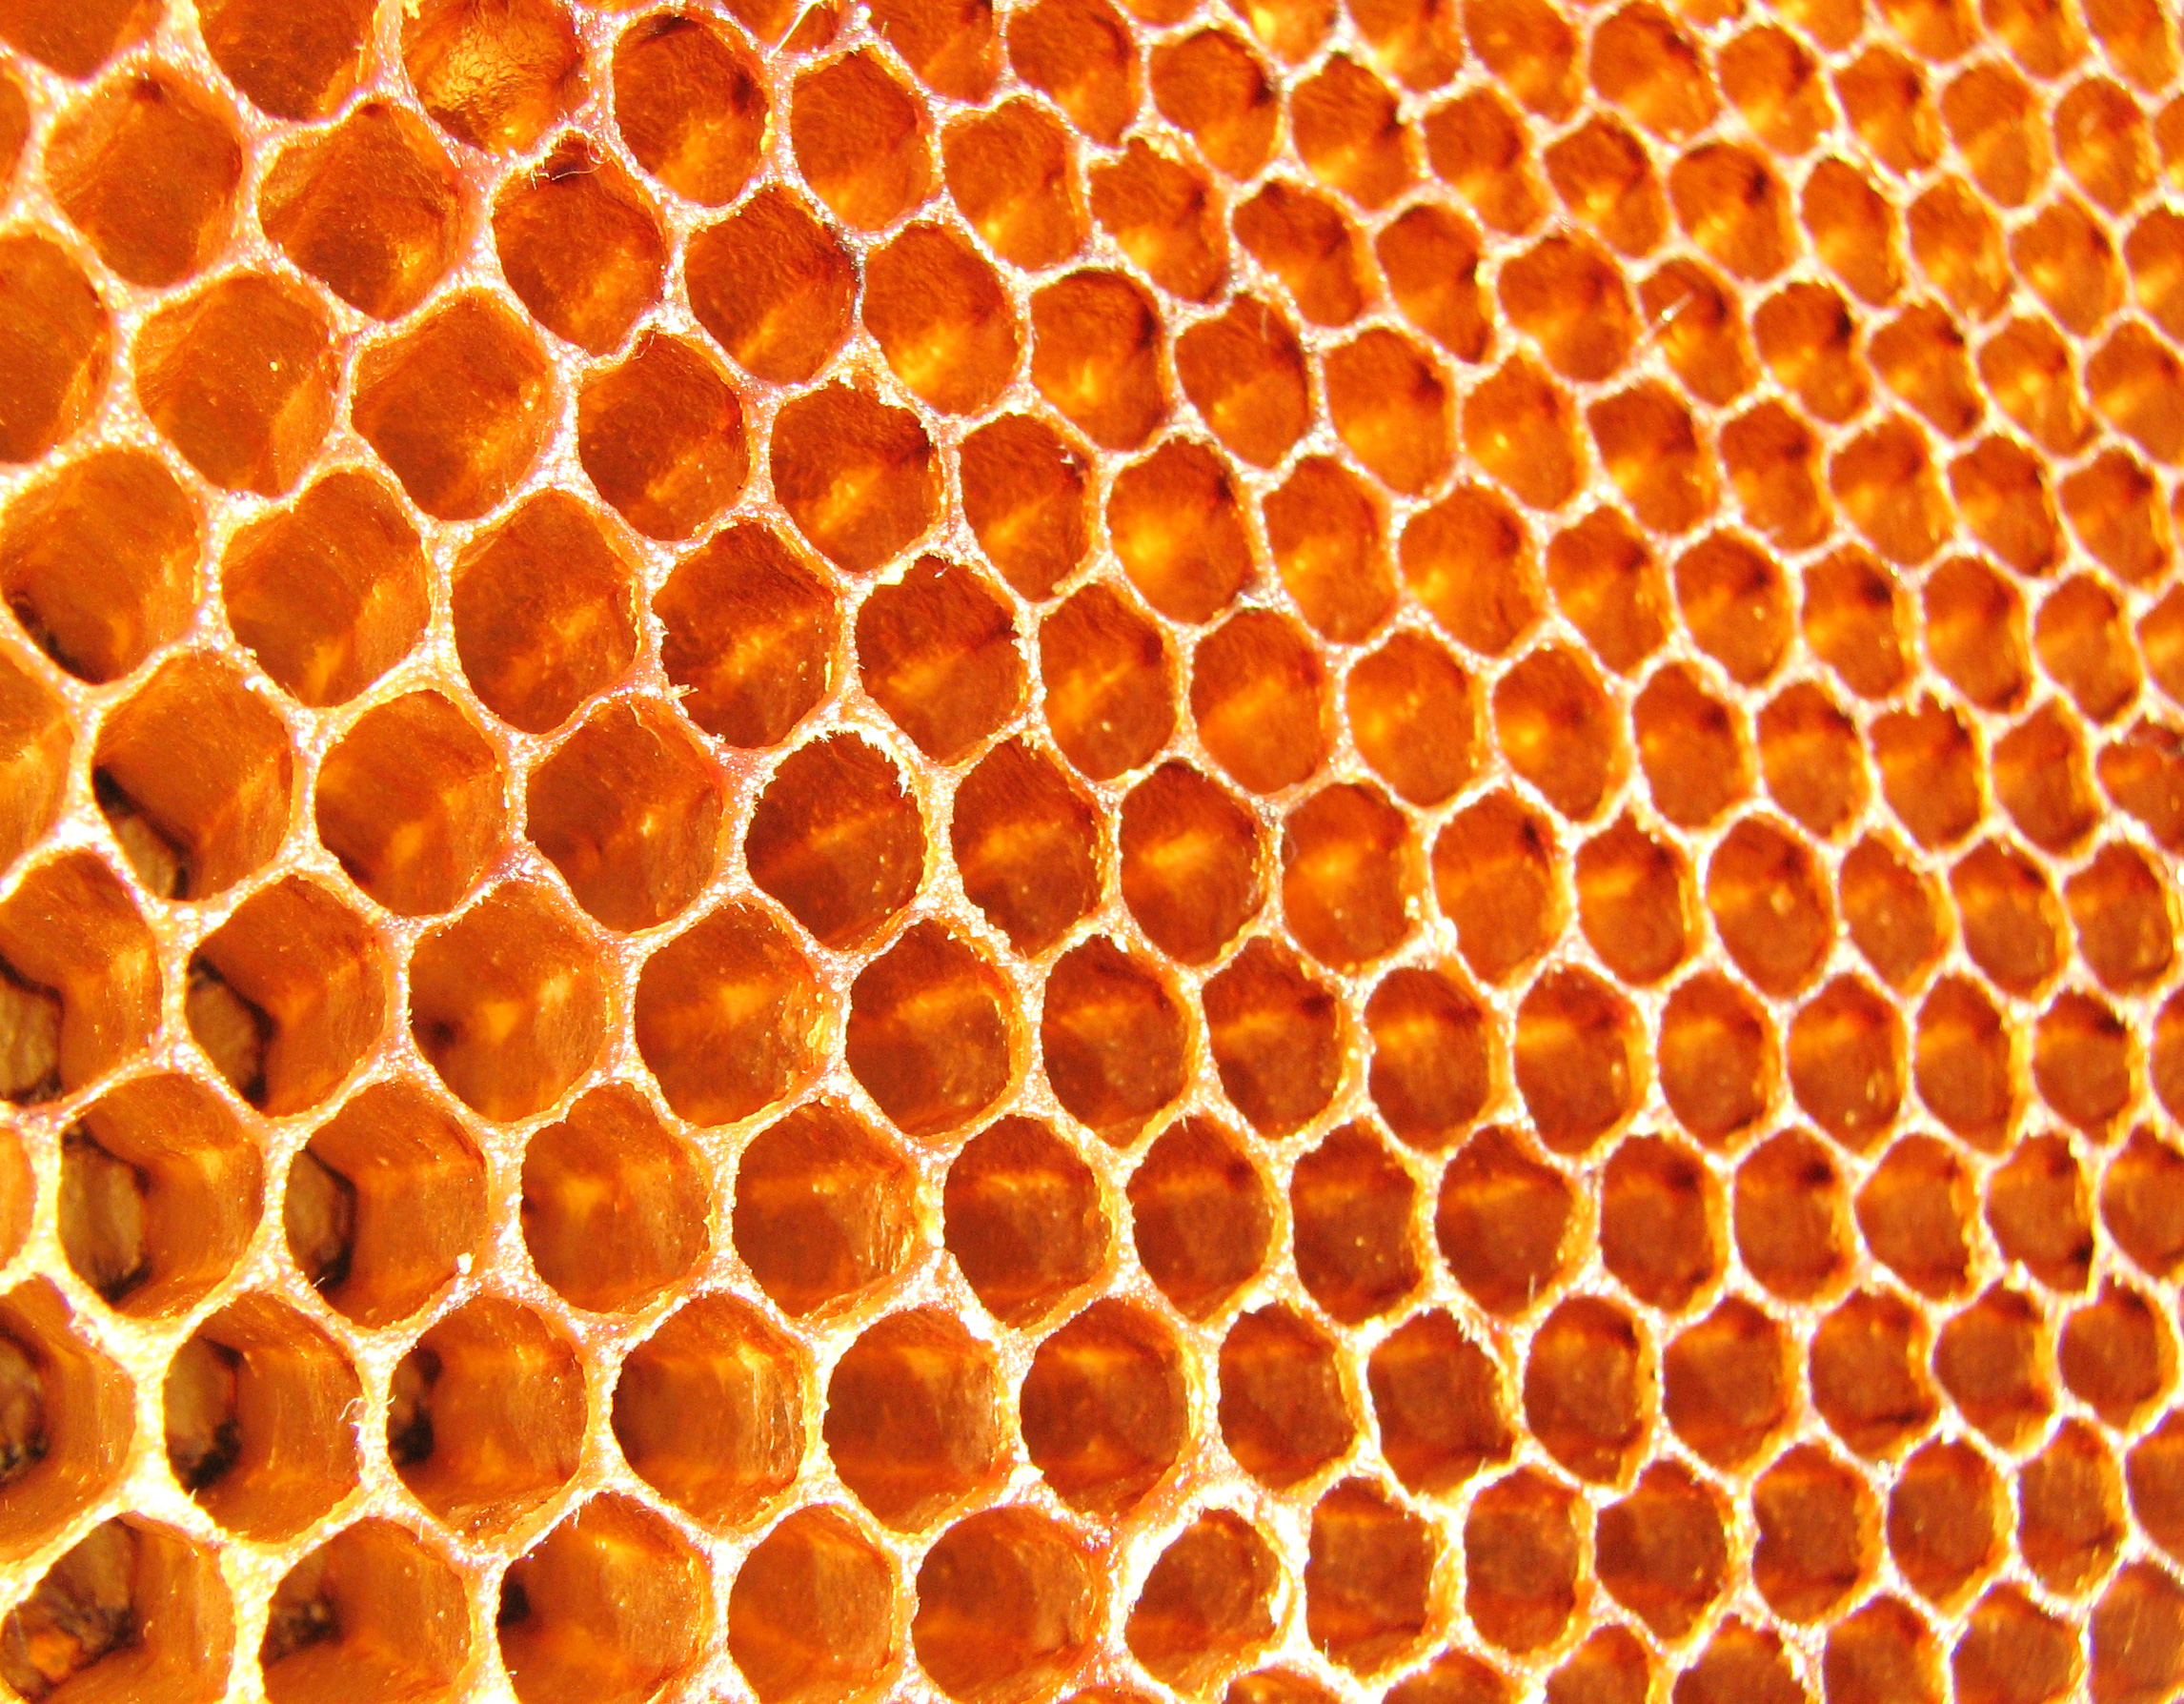 A honeycomb, the international symbol for microservices